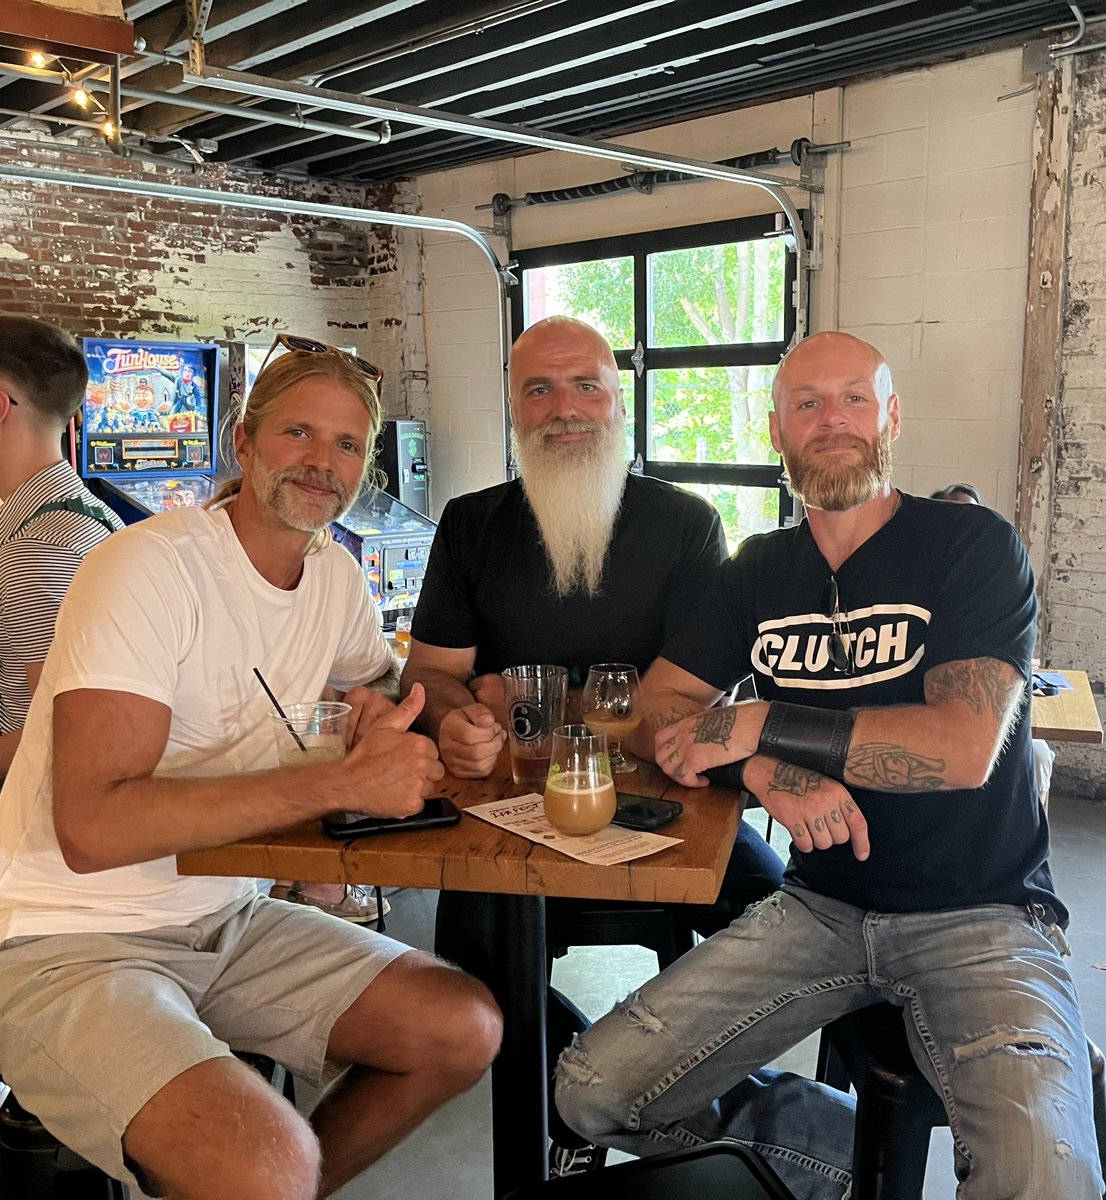 Lifelong friendships are very rare. I’m so lucky to still have these two guys in my life after all these years. #daysofthenew #tantric #blisskrieg